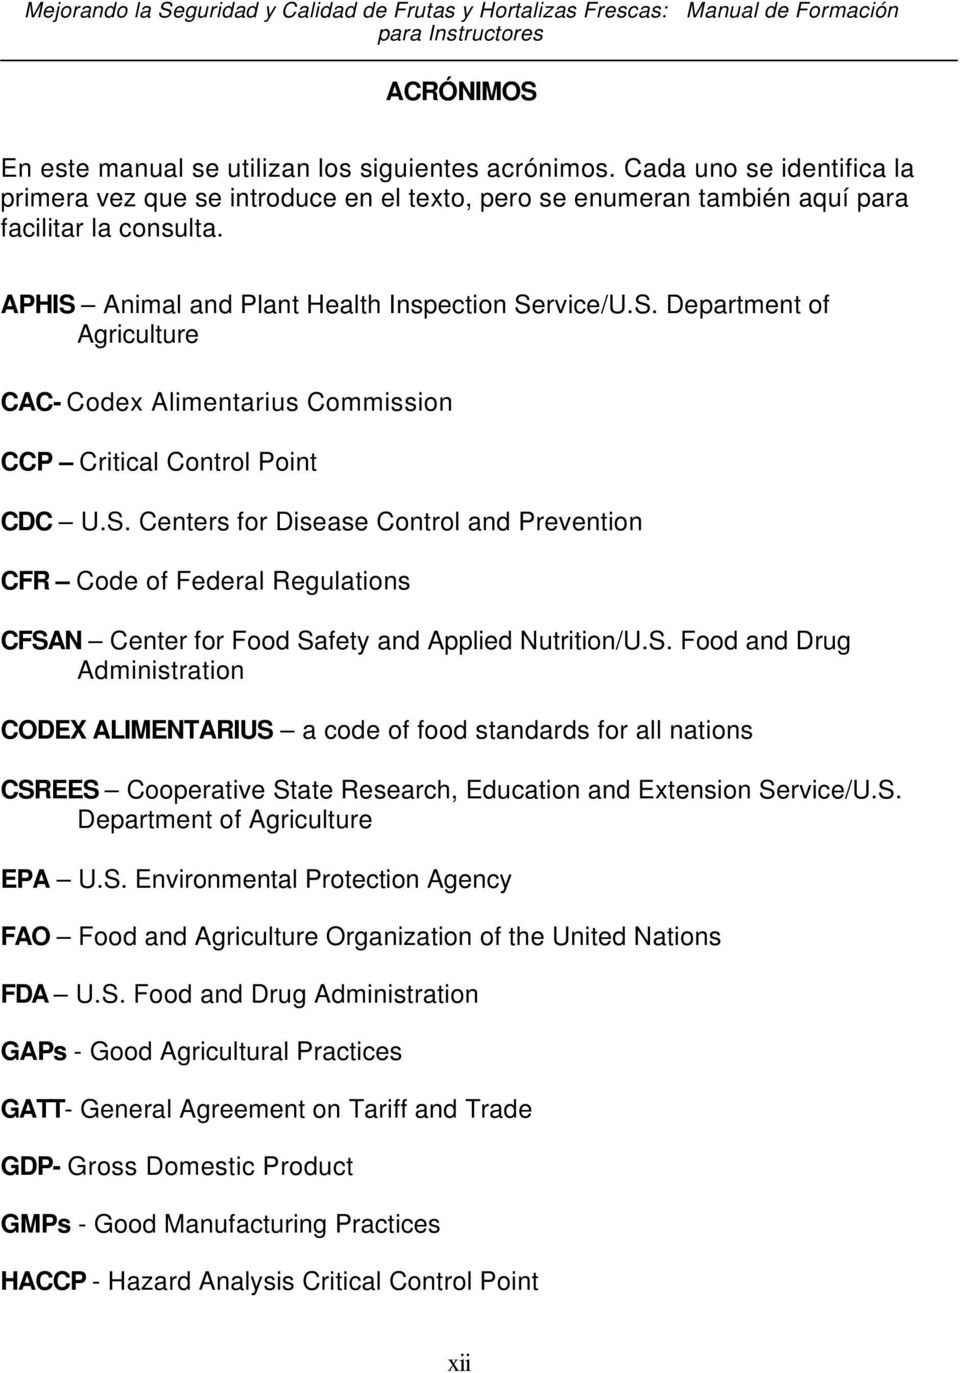 S. Food and Drug Administration CODEX ALIMENTARIUS a code of food standards for all nations CSREES Cooperative State Research, Education and Extension Service/U.S. Department of Agriculture EPA U.S. Environmental Protection Agency FAO Food and Agriculture Organization of the United Nations FDA U.